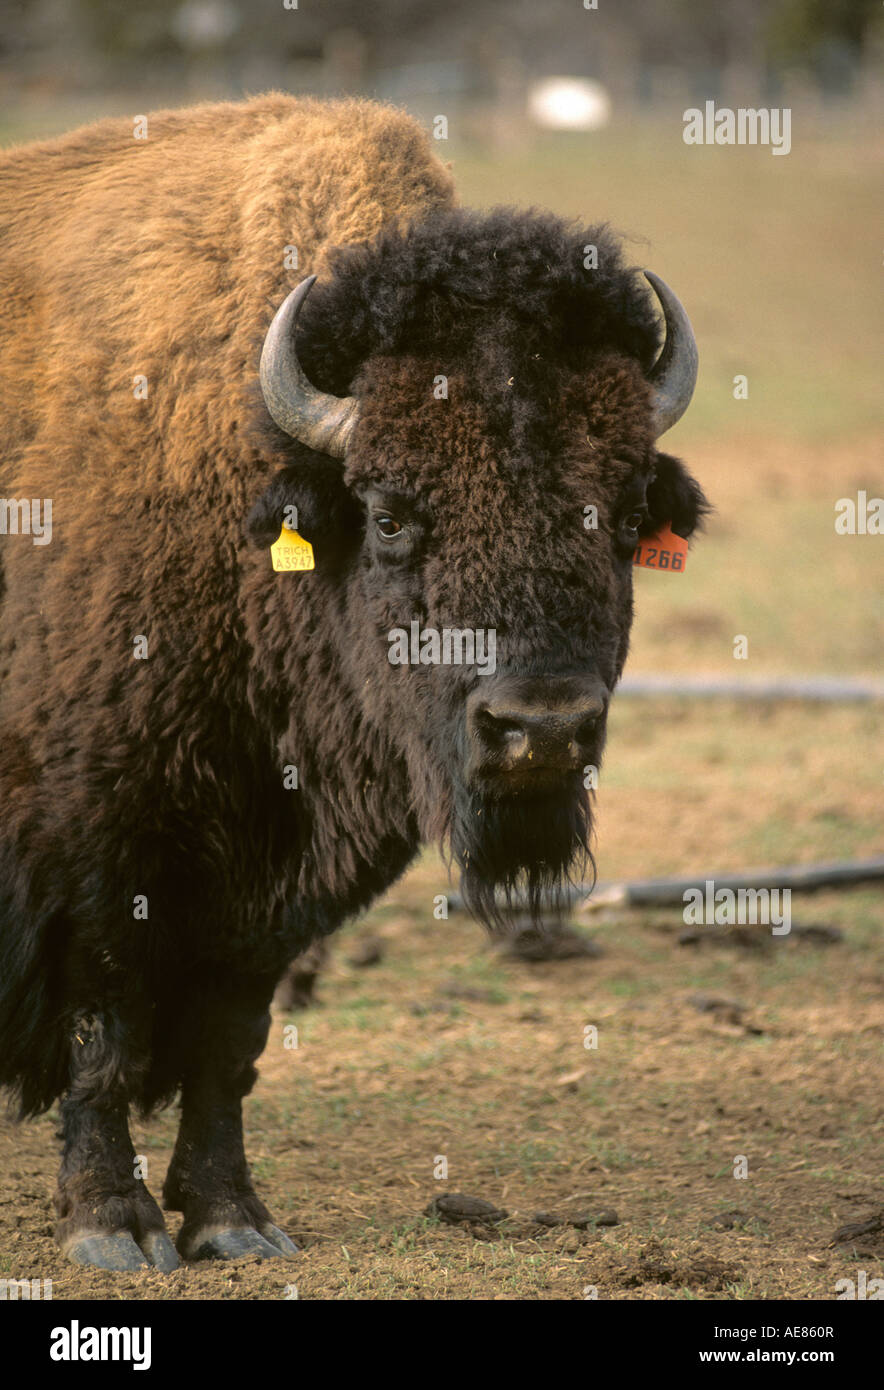 Captive Buffalo at ranch in Southern Utah, raised for meat Stock Photo